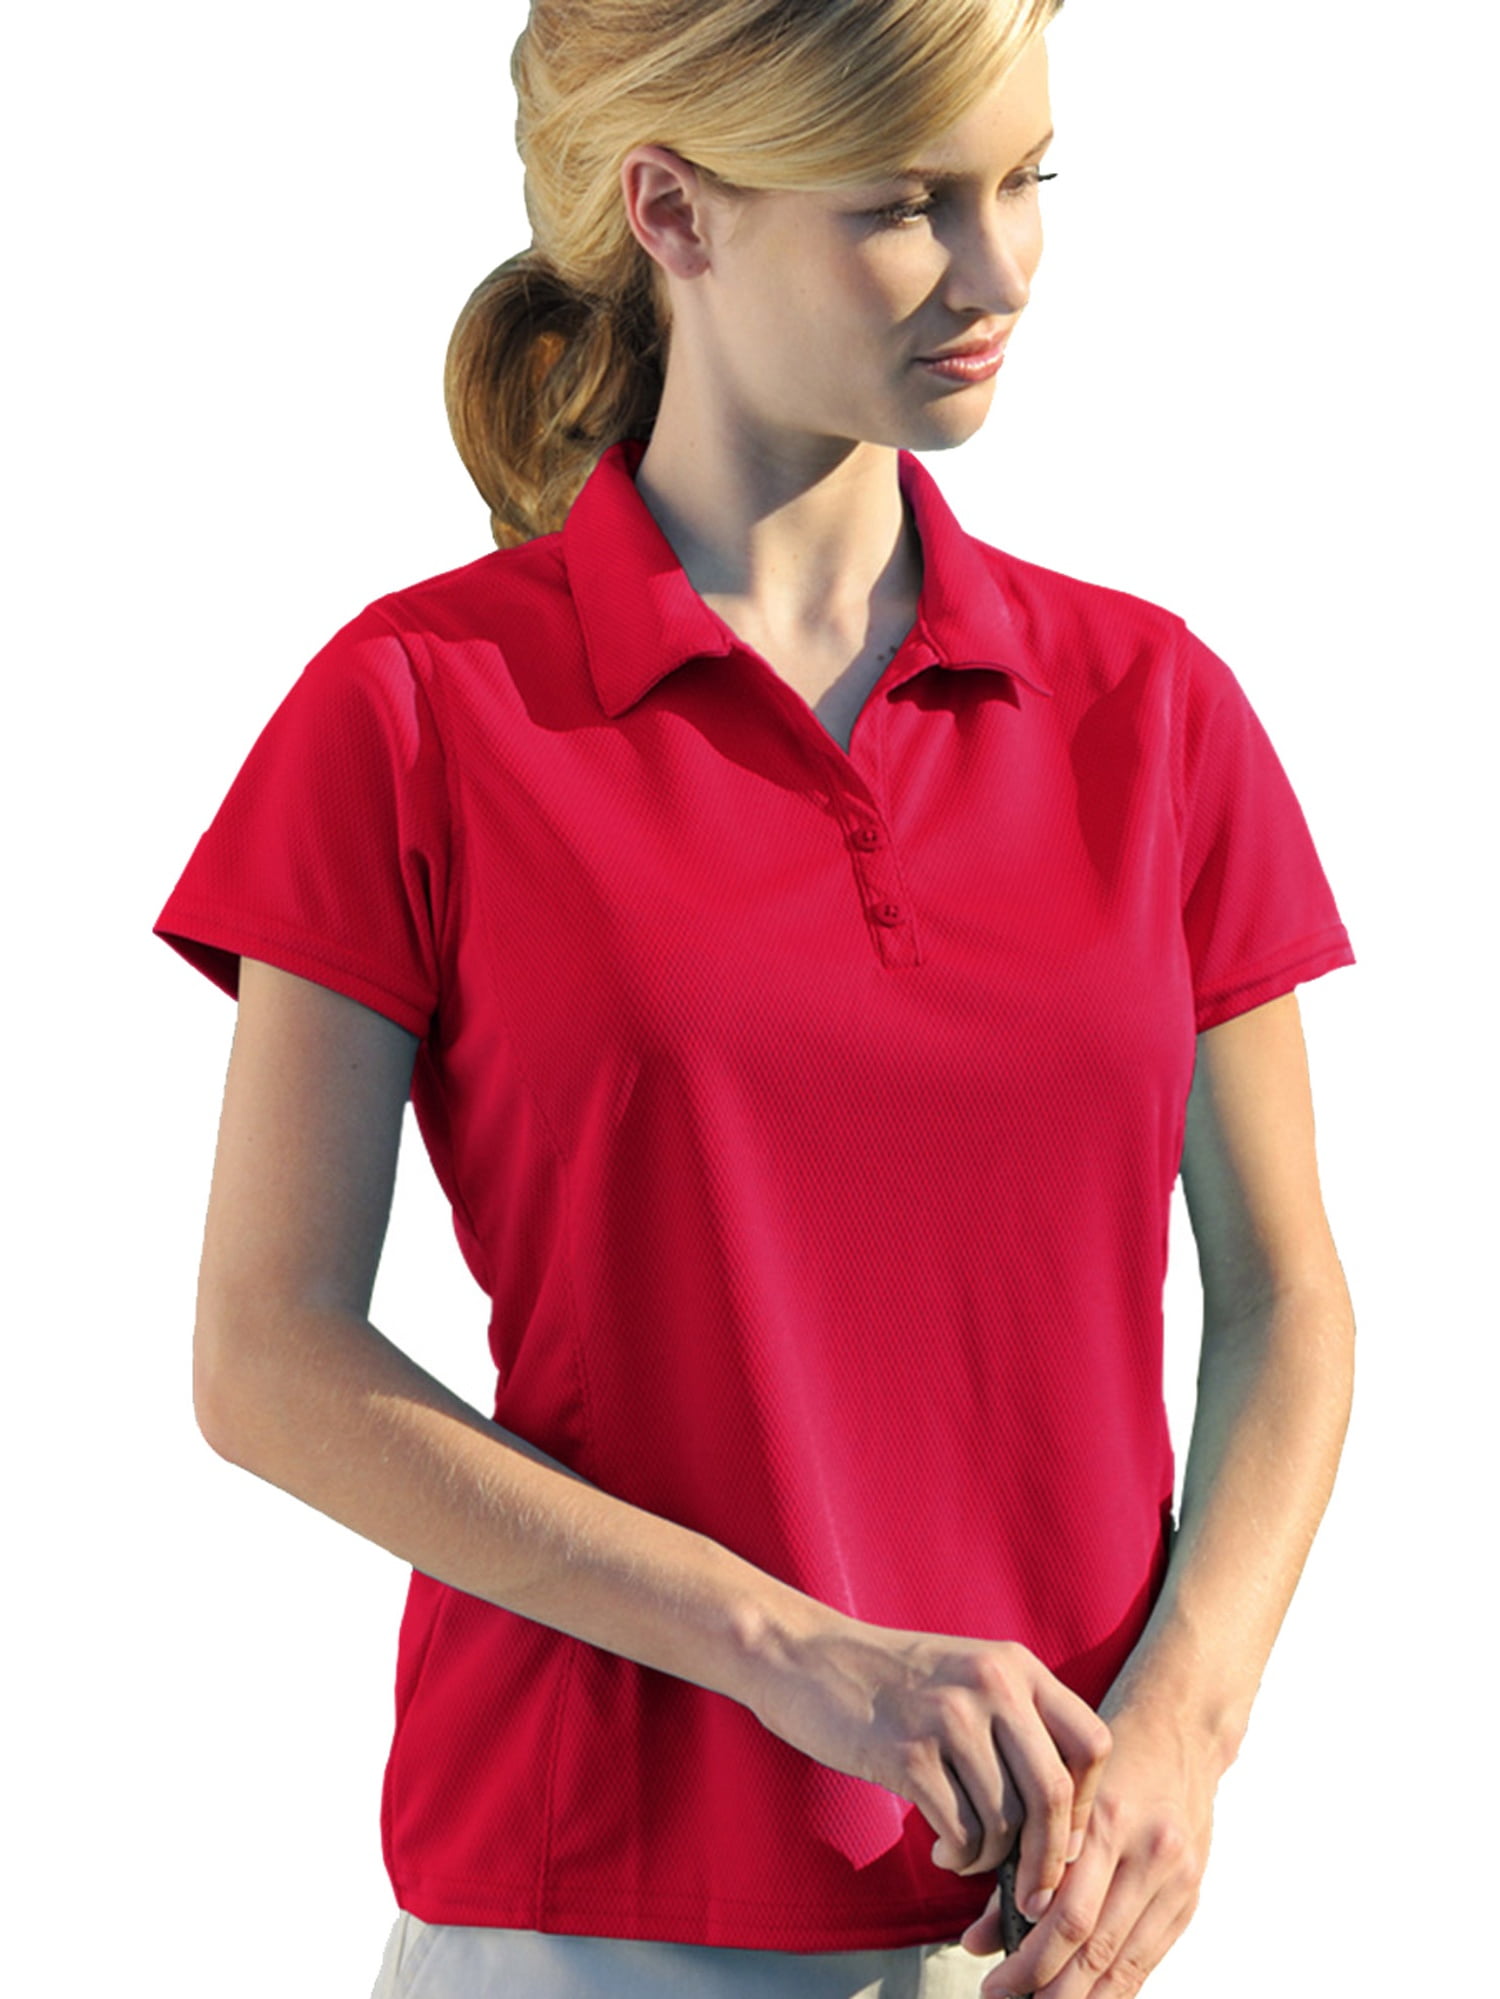 Willow Pointe - 00820599181382 LADIES PERFORMANCE GOLF SHIRT 2801 RED S ...